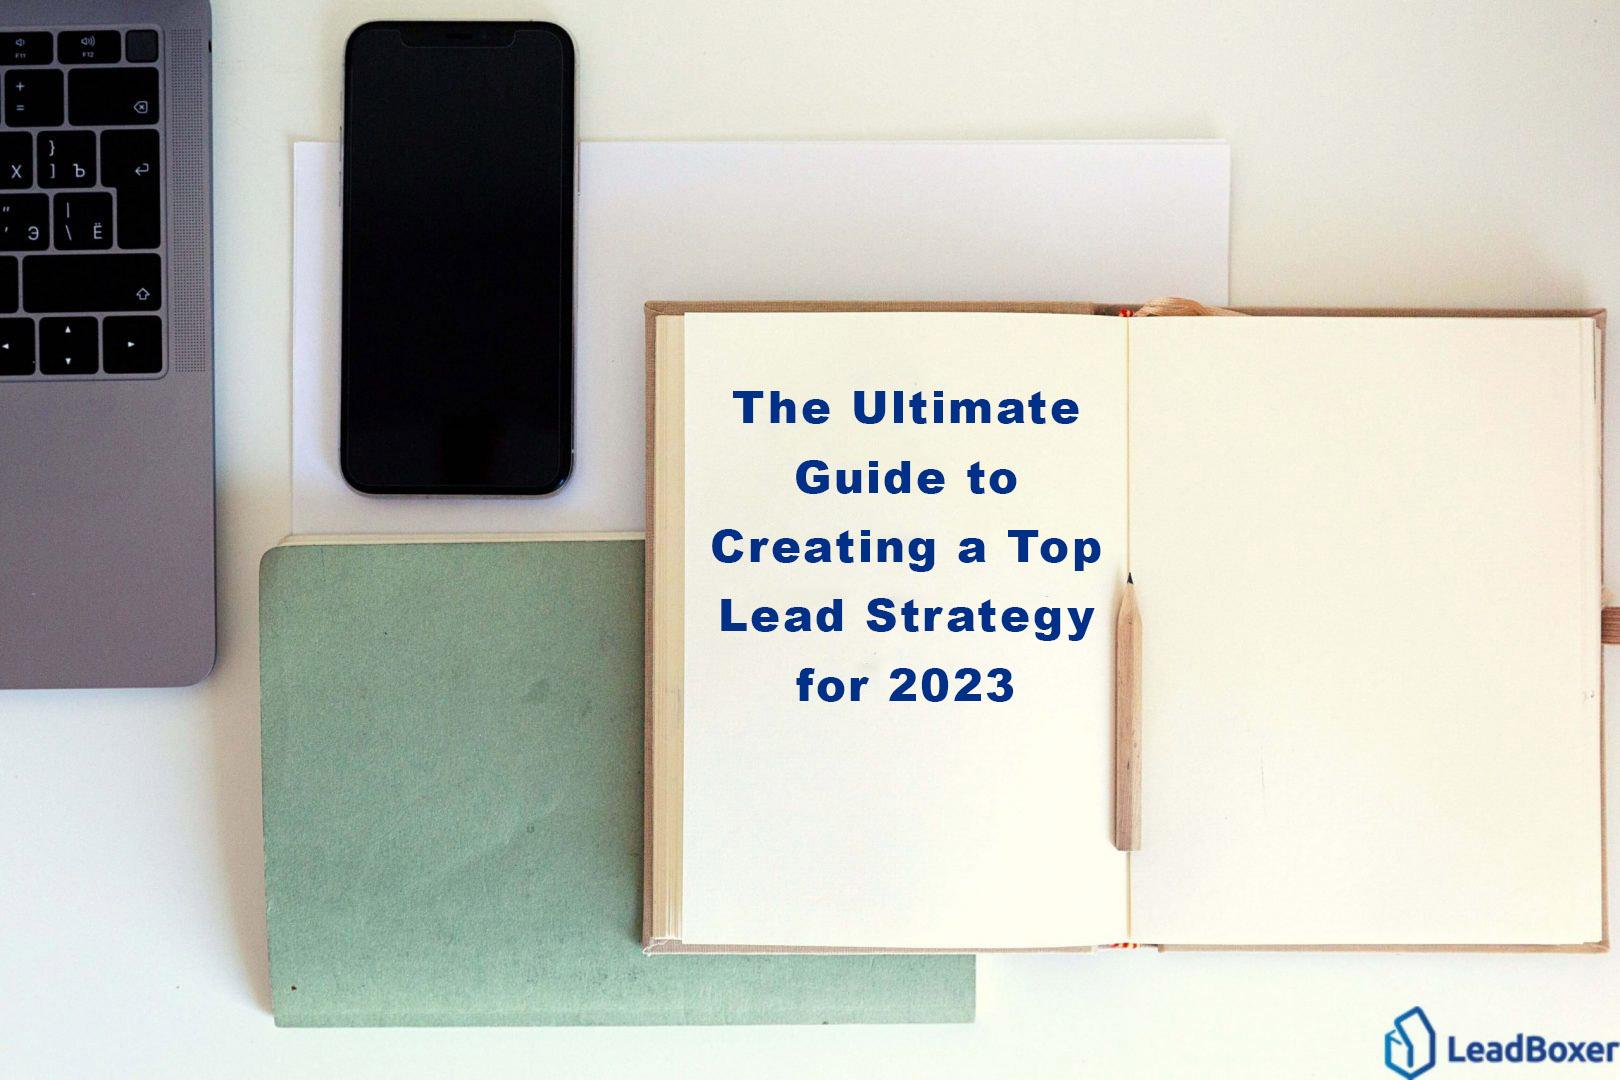 The Ultimate Guide to Creating a Top Lead Strategy for 2023